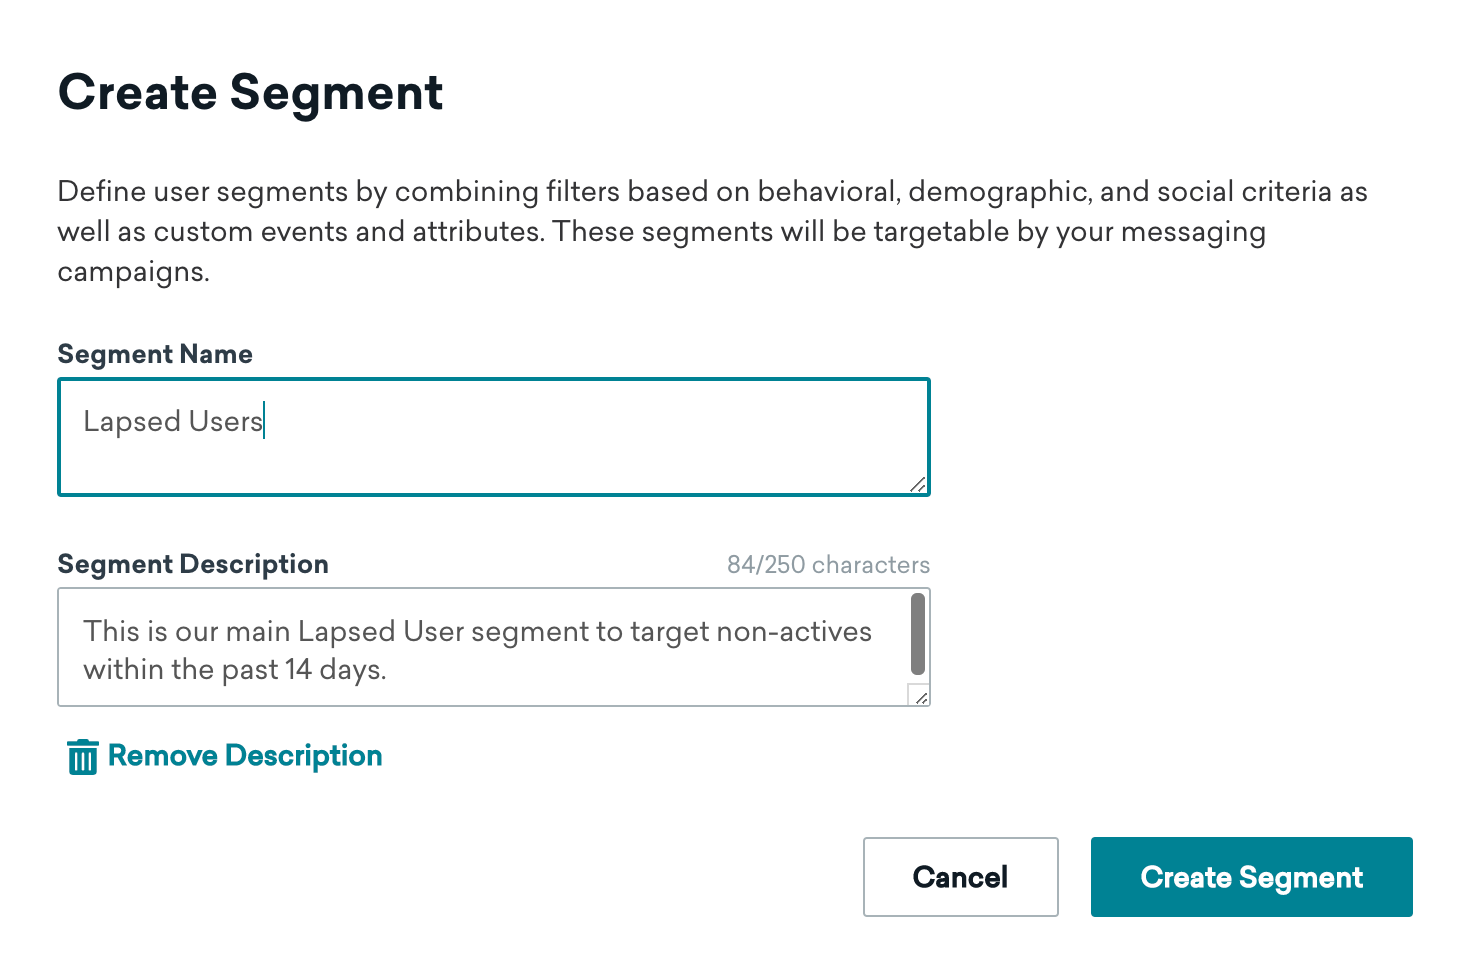 Create Segment modal where the segment is named "Lapsed Users" with the Segment Description as "This is our main Lapsed User segment to target non-actives within the past fourteen days." with two buttons: Cancel and Create Segment.